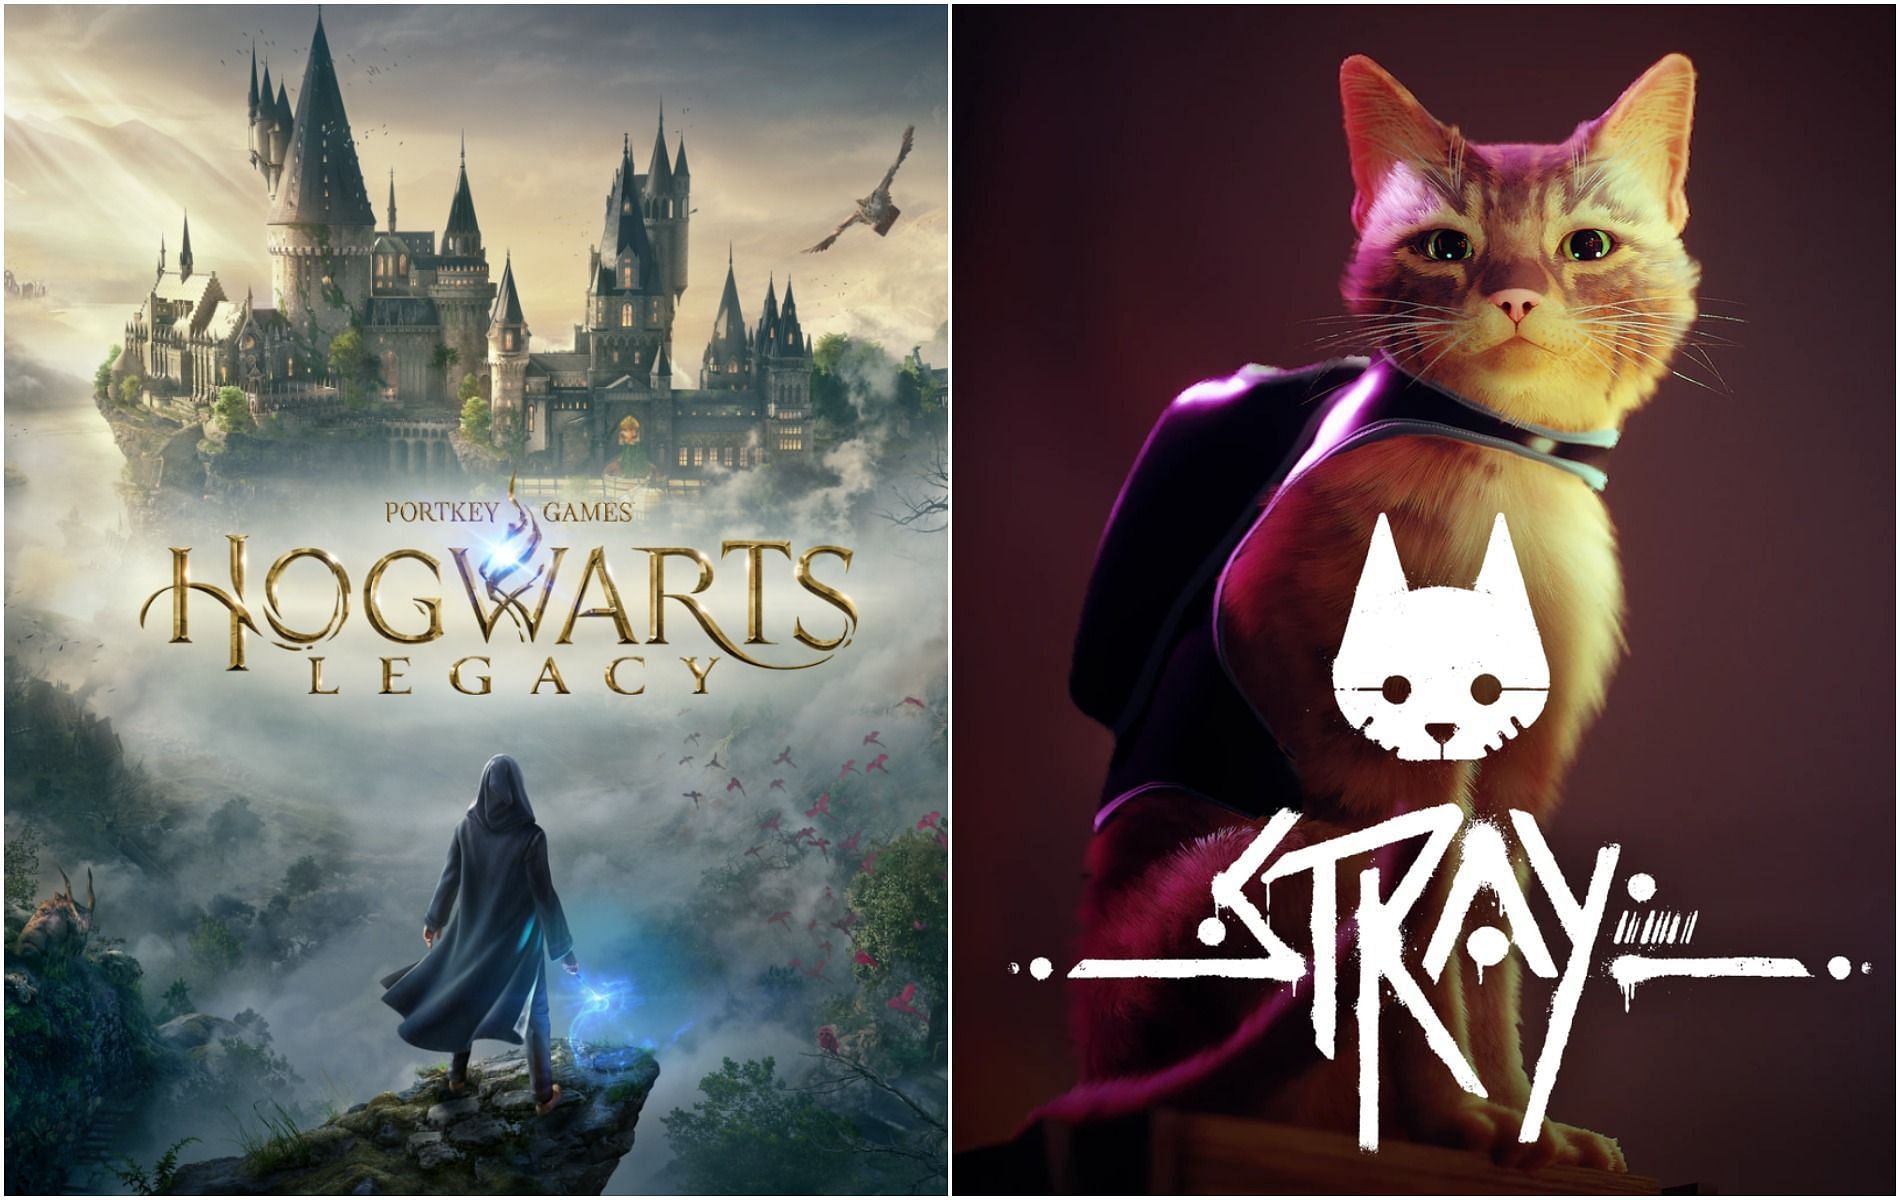 Stray (R) and Hogwarts Legacy were some of the biggest misses at The Game Awards 2021 (Image via Sportskeeda)